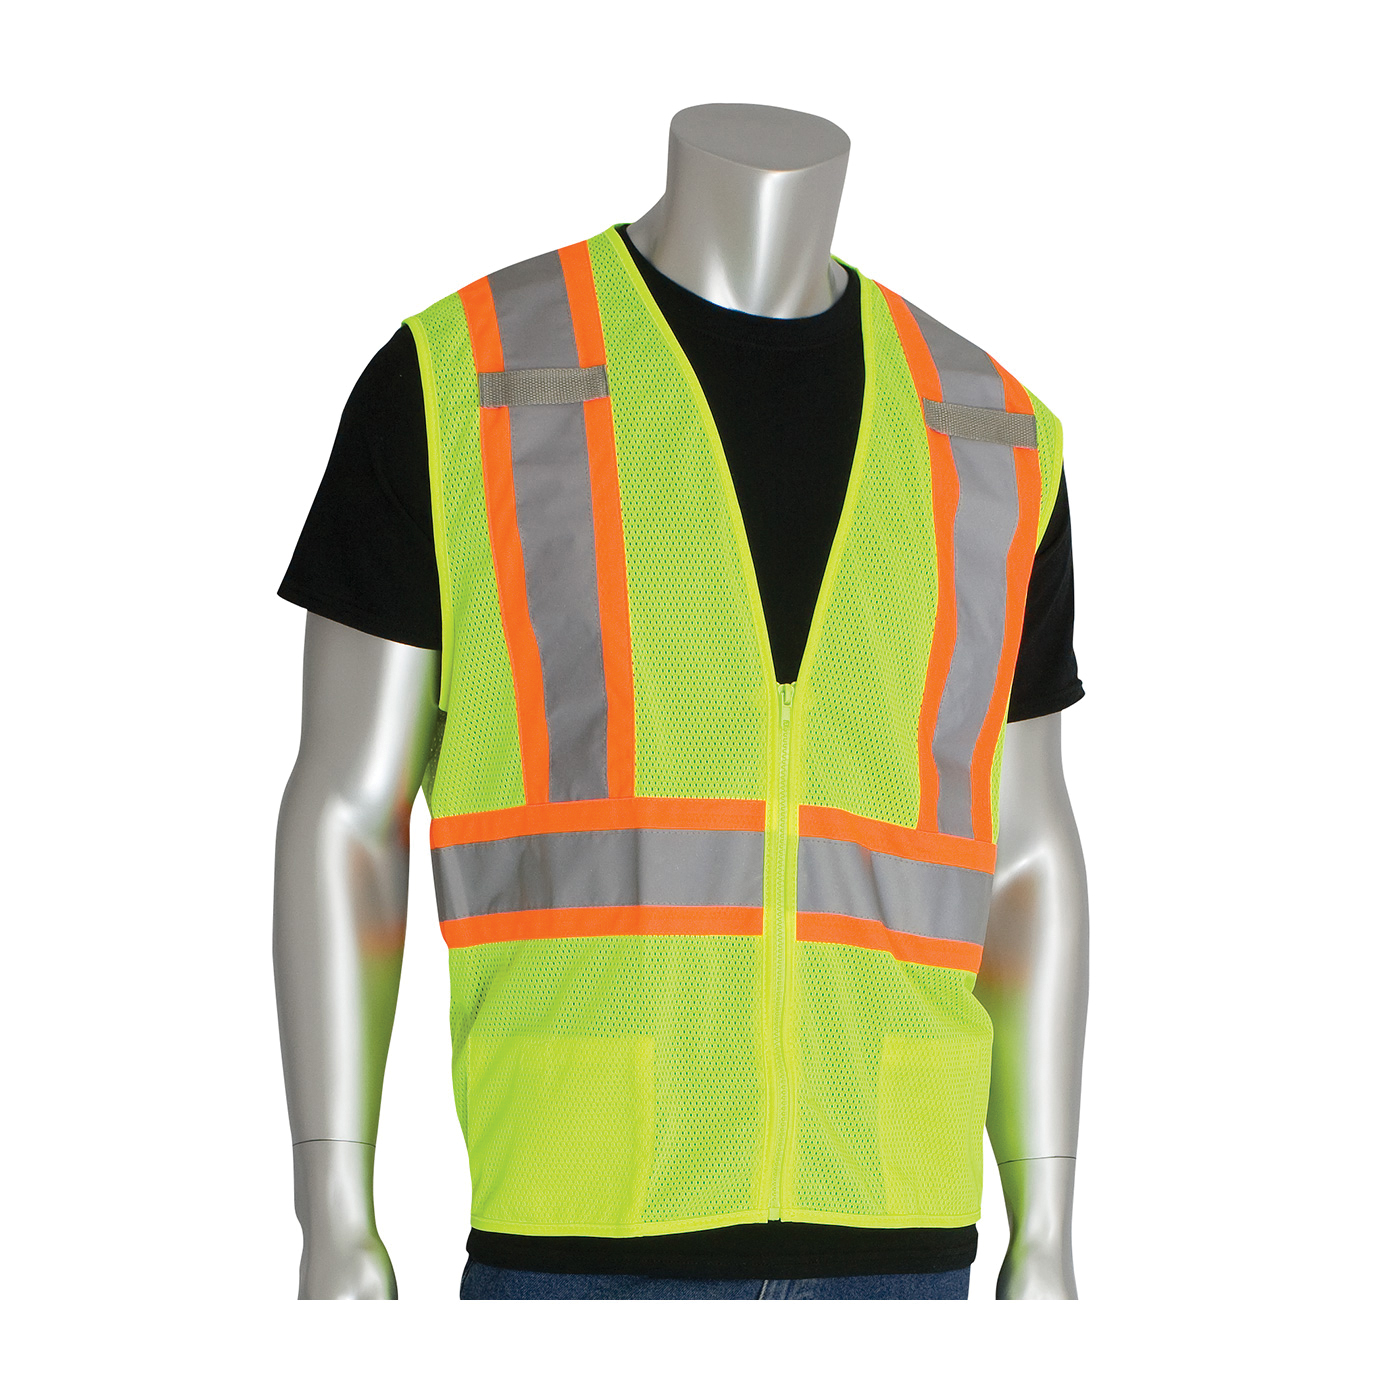 PIP® 302-0600D-LY/L 2-Tone Safety Access Vest With "D" Ring Access, L, Hi-Viz Lime Yellow, Polyester, Zipper Closure, 2 Pockets, ANSI Class: Class 2, Specifications Met: ANSI 107 Type R